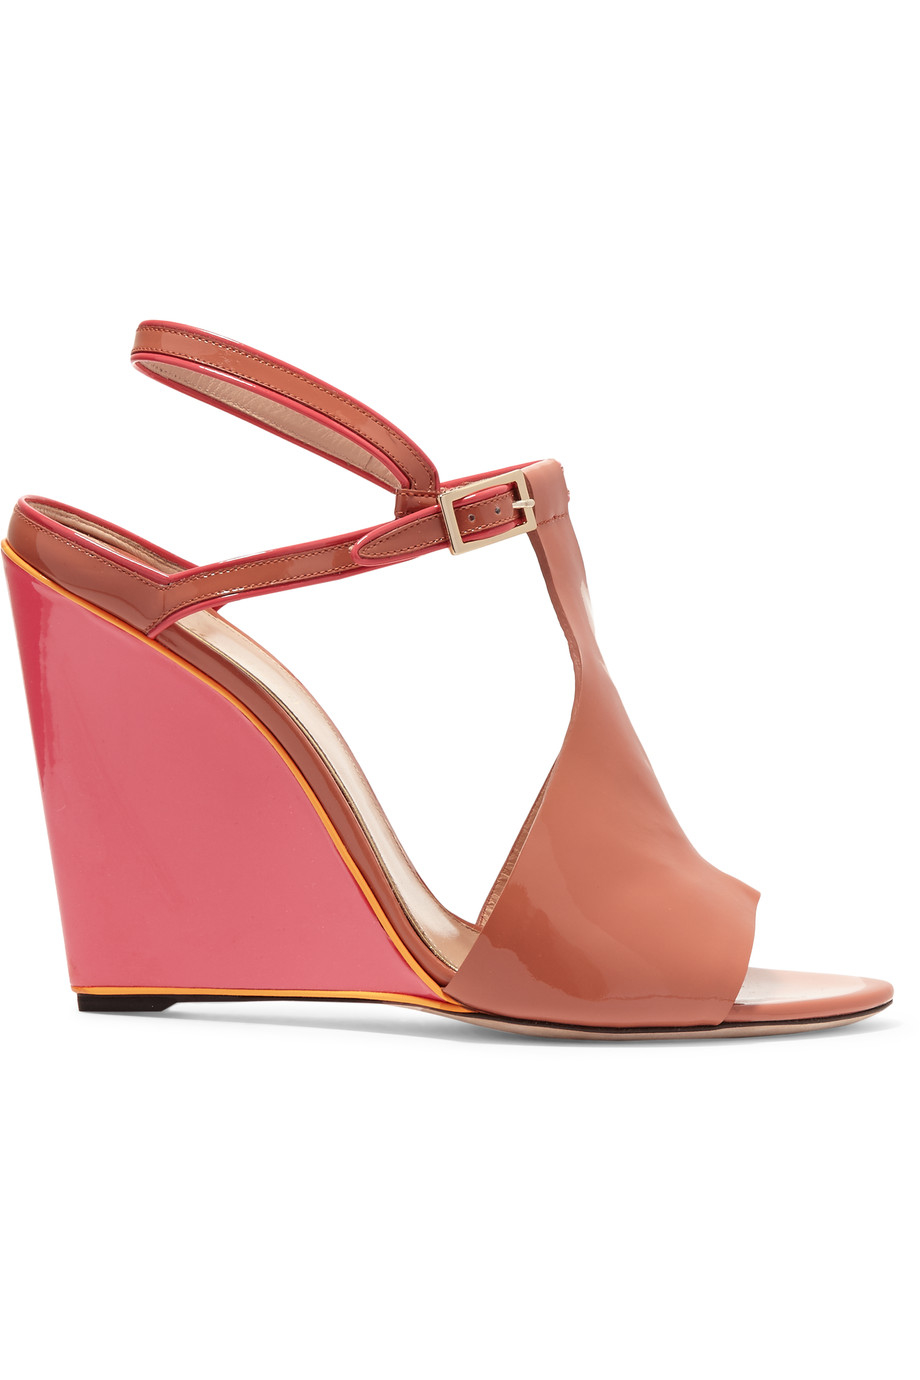 Emilio pucci Two-tone Patent-leather Wedge Sandals in Pink - Save 56% ...